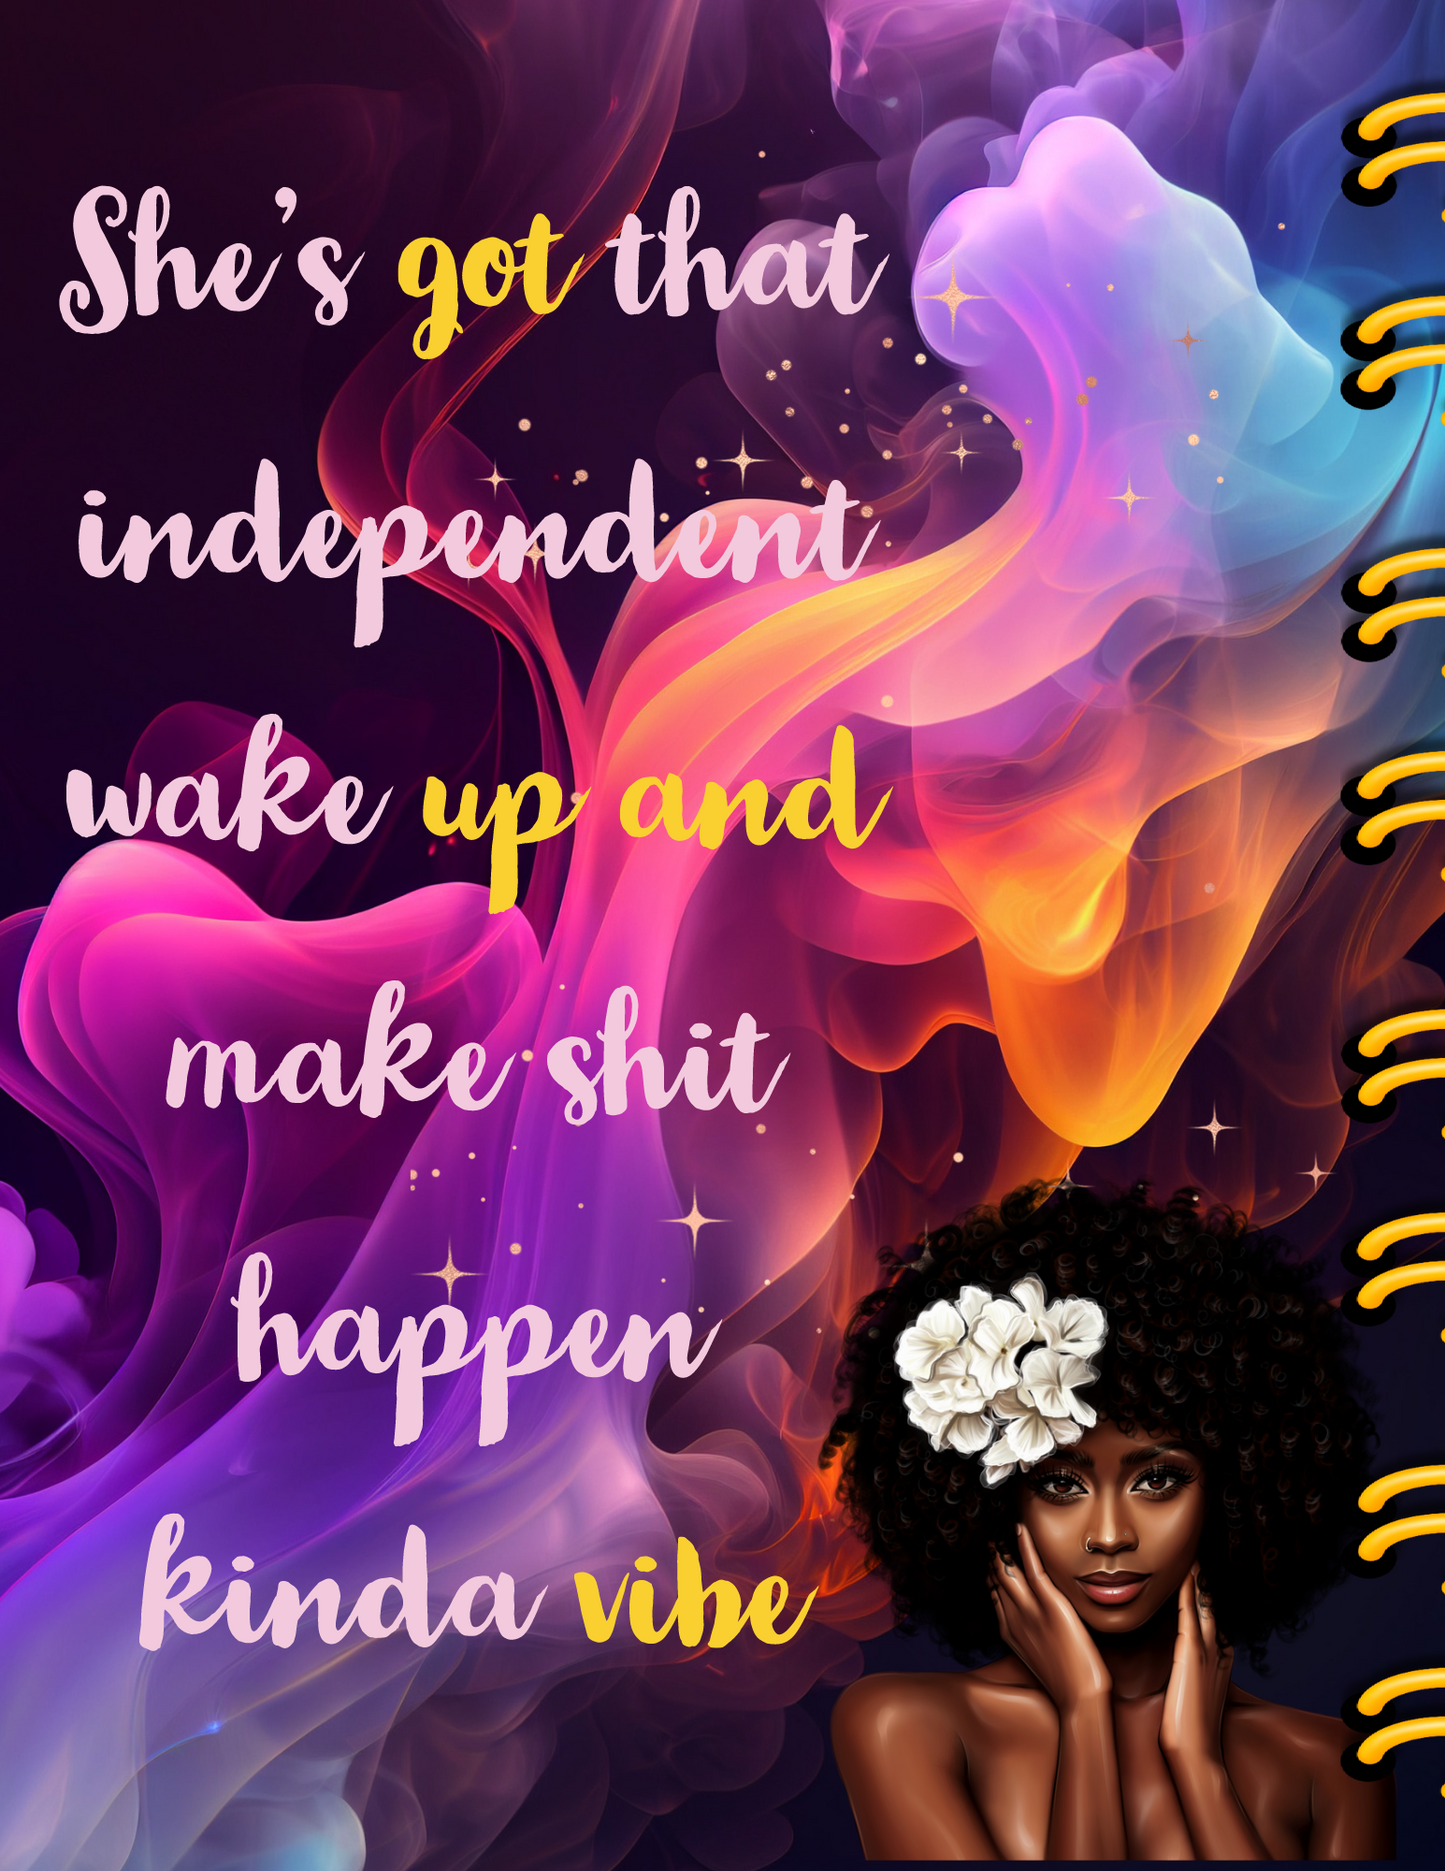 Cover: She's got that independent wake up and make shit happen kinda vibe